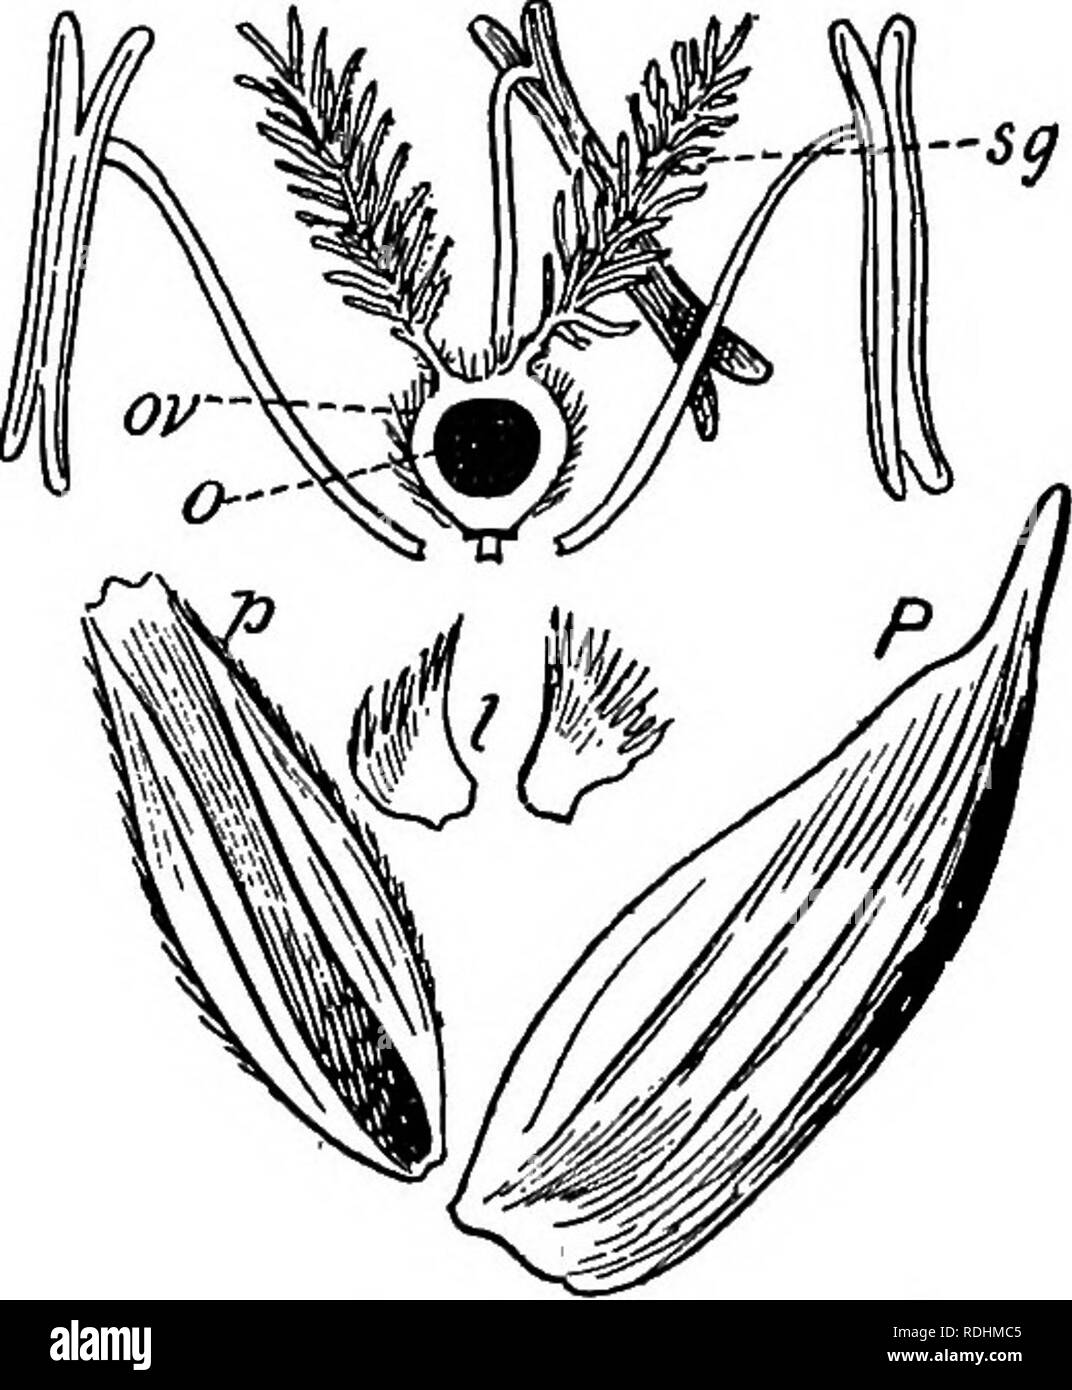 . Elementary botany . Botany. Fig. 235.—Diagram of flower of Wheat. no flowers in their axils j they constitute, in fact, a small involucre. Above them, on the spikelet axis, are bracts which form two rows, have single flowers in their axils, and are termed flowerifig glumes or lower pales or palea {P-^, P„, Ps,-Pi, P,). These latter alternate as A do the glumes, so that the first or lowest of them (P^) stands above the lower glume (G) : the second {P2) is inserted on the op- posite side of the axis and is above the upper glume (g). The flowering glumes, and ' less frequently the barren glumes Stock Photo